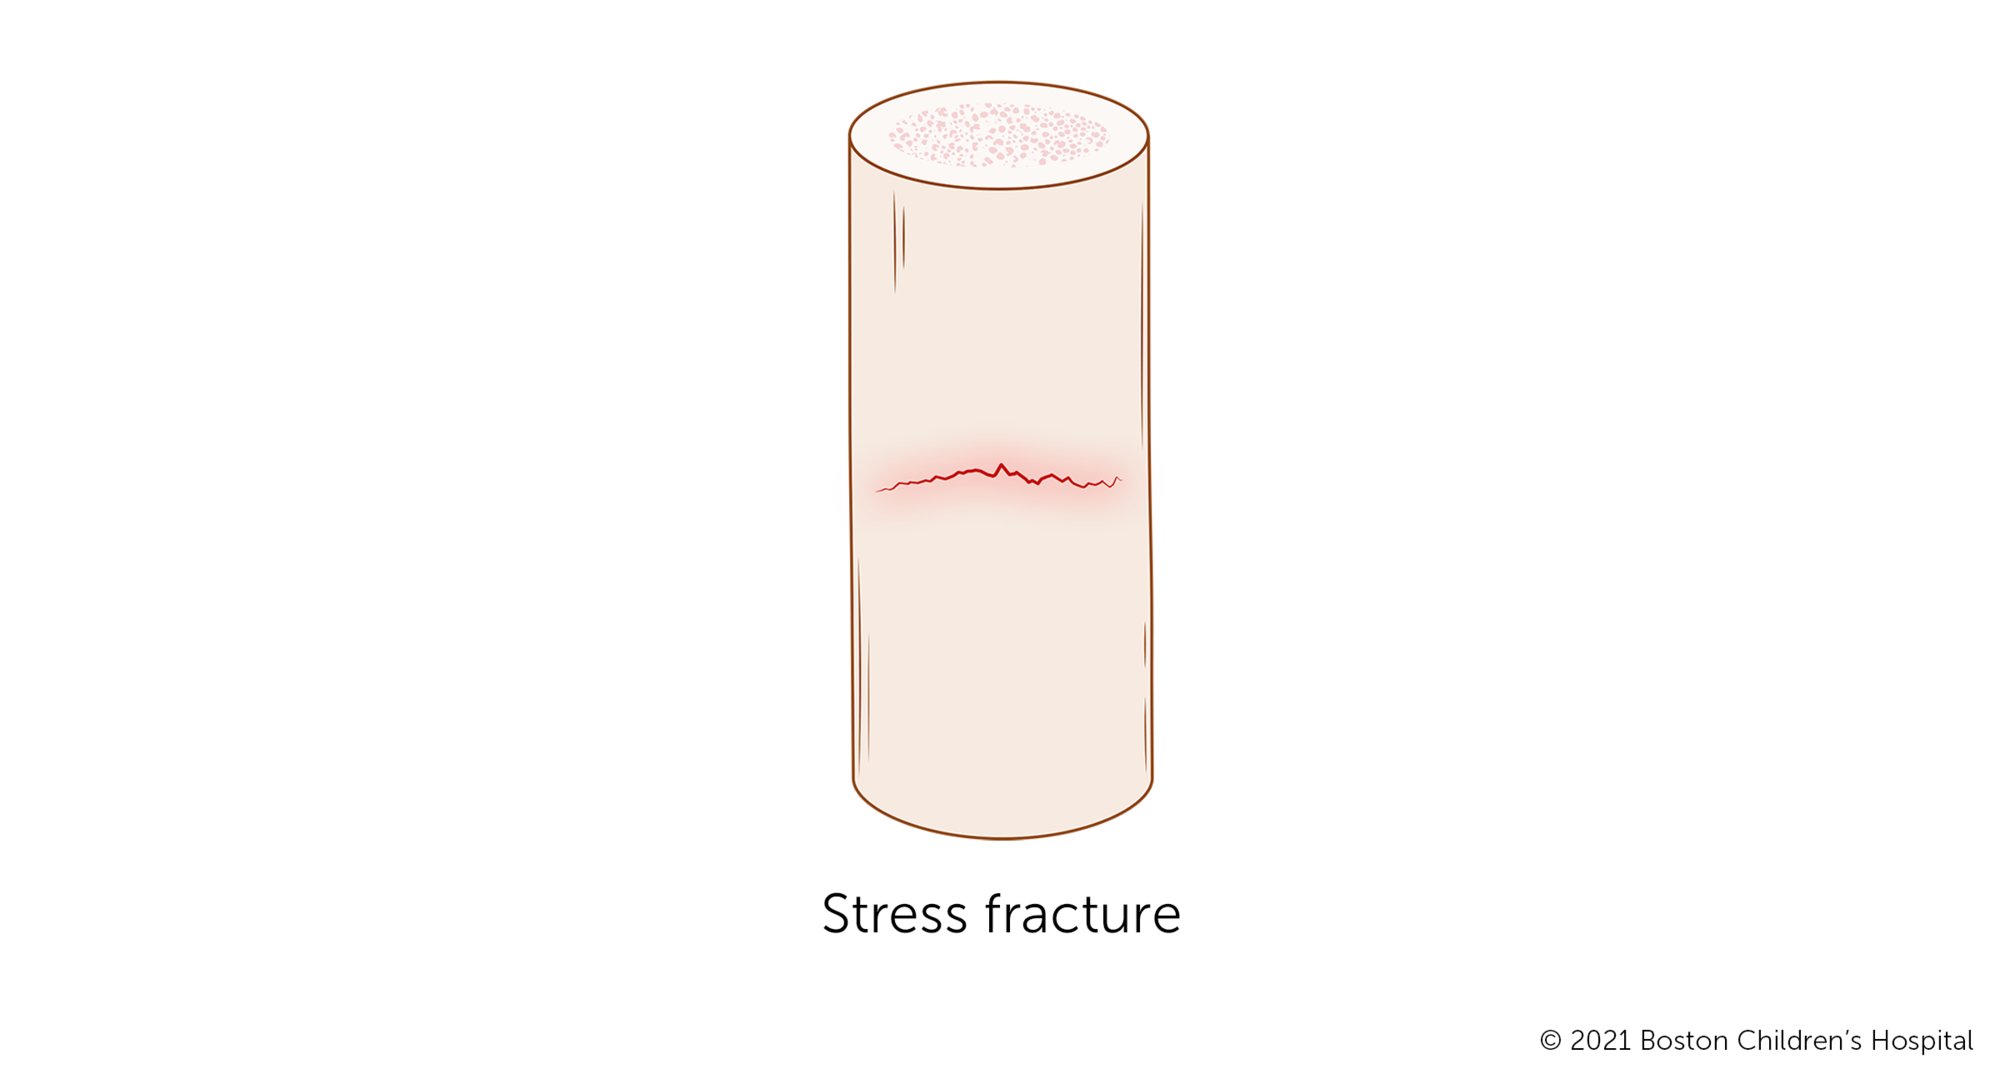 A stress fracture is a tiny crack that does not go all the way through the bone.